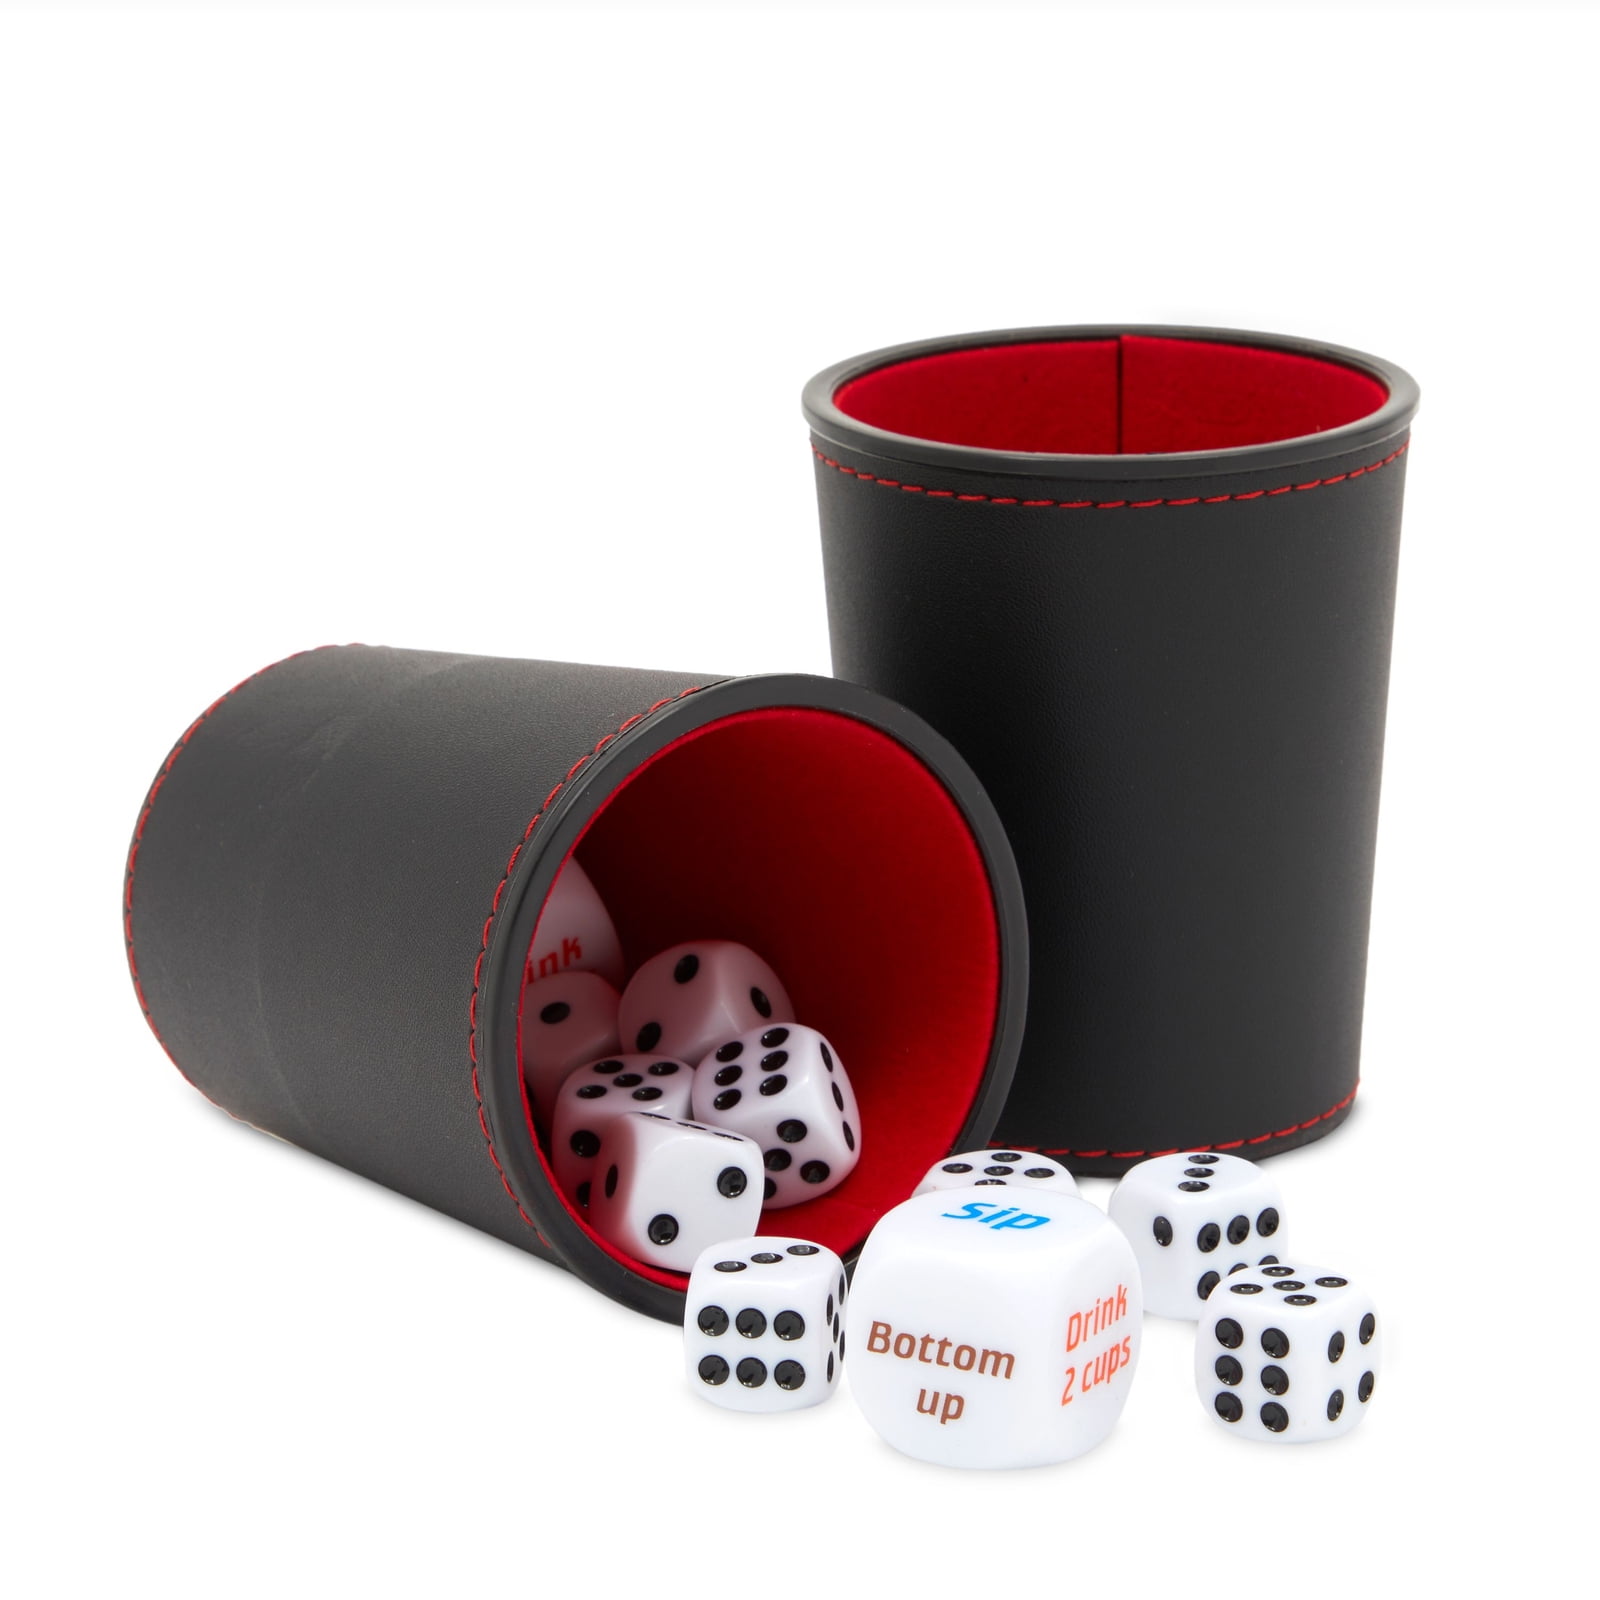 Does not include the dice 20 pack LEATHER DICE CUP POKER BAR GAMES CASINO 